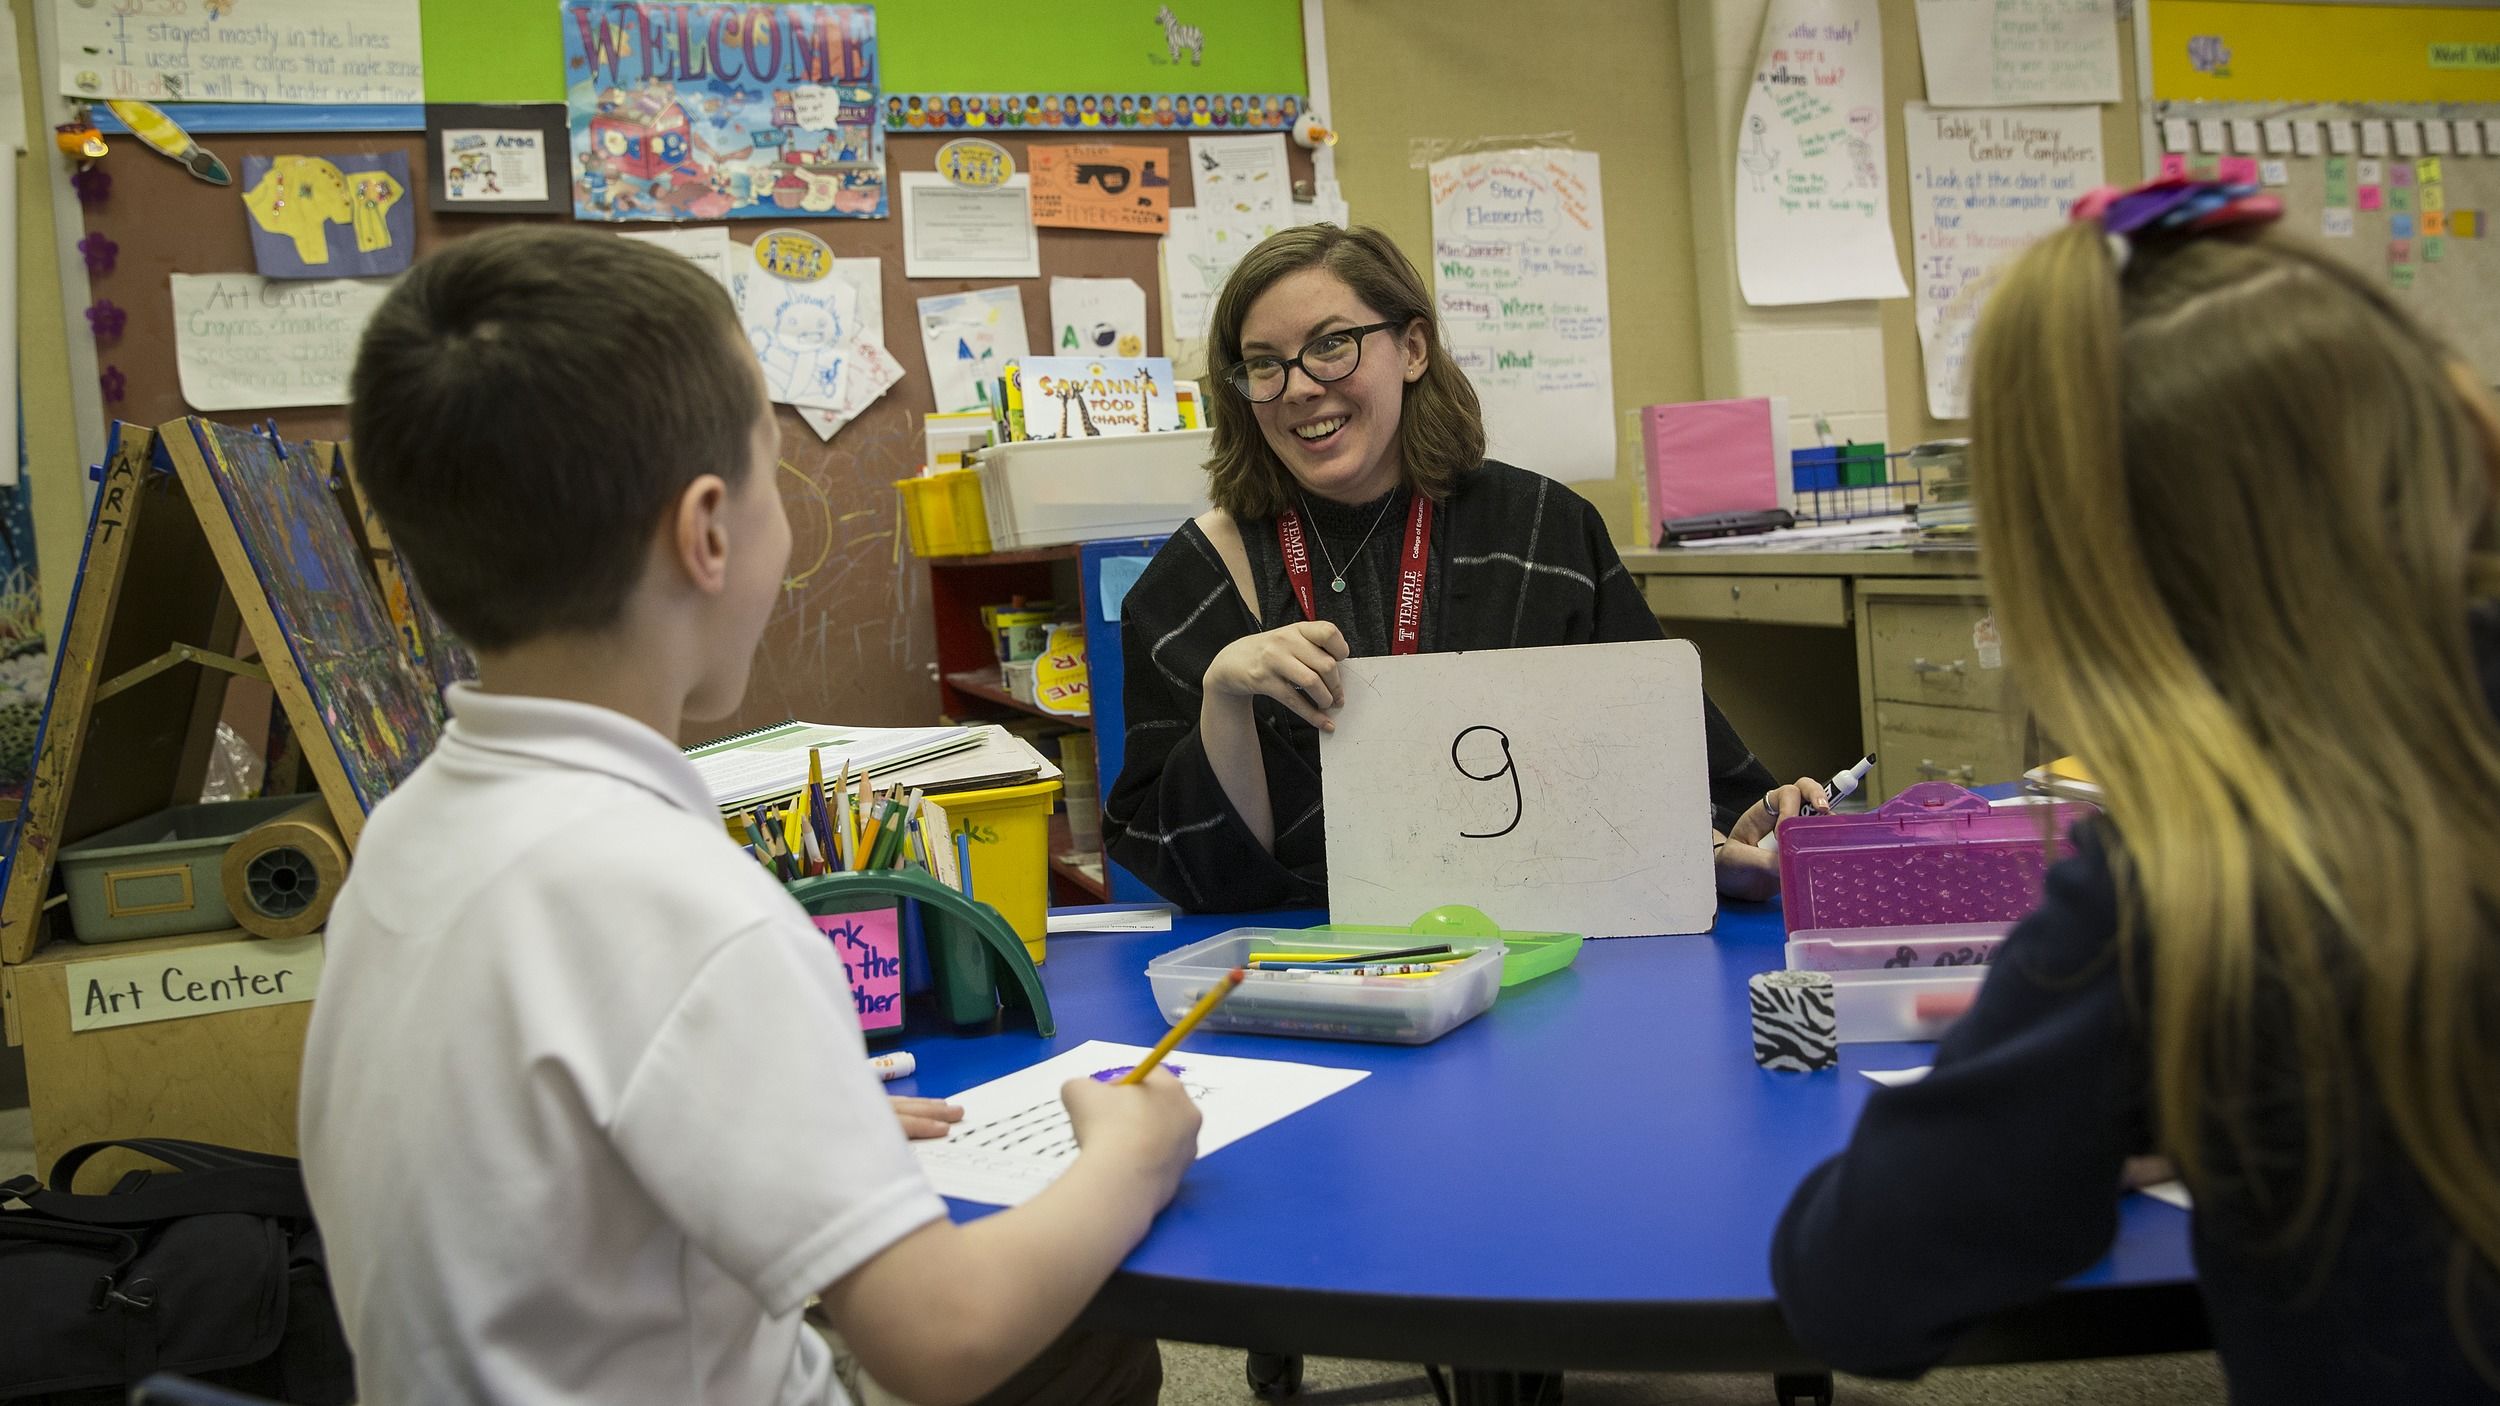 A student teacher sits at a desk with students in an elementary classroom.